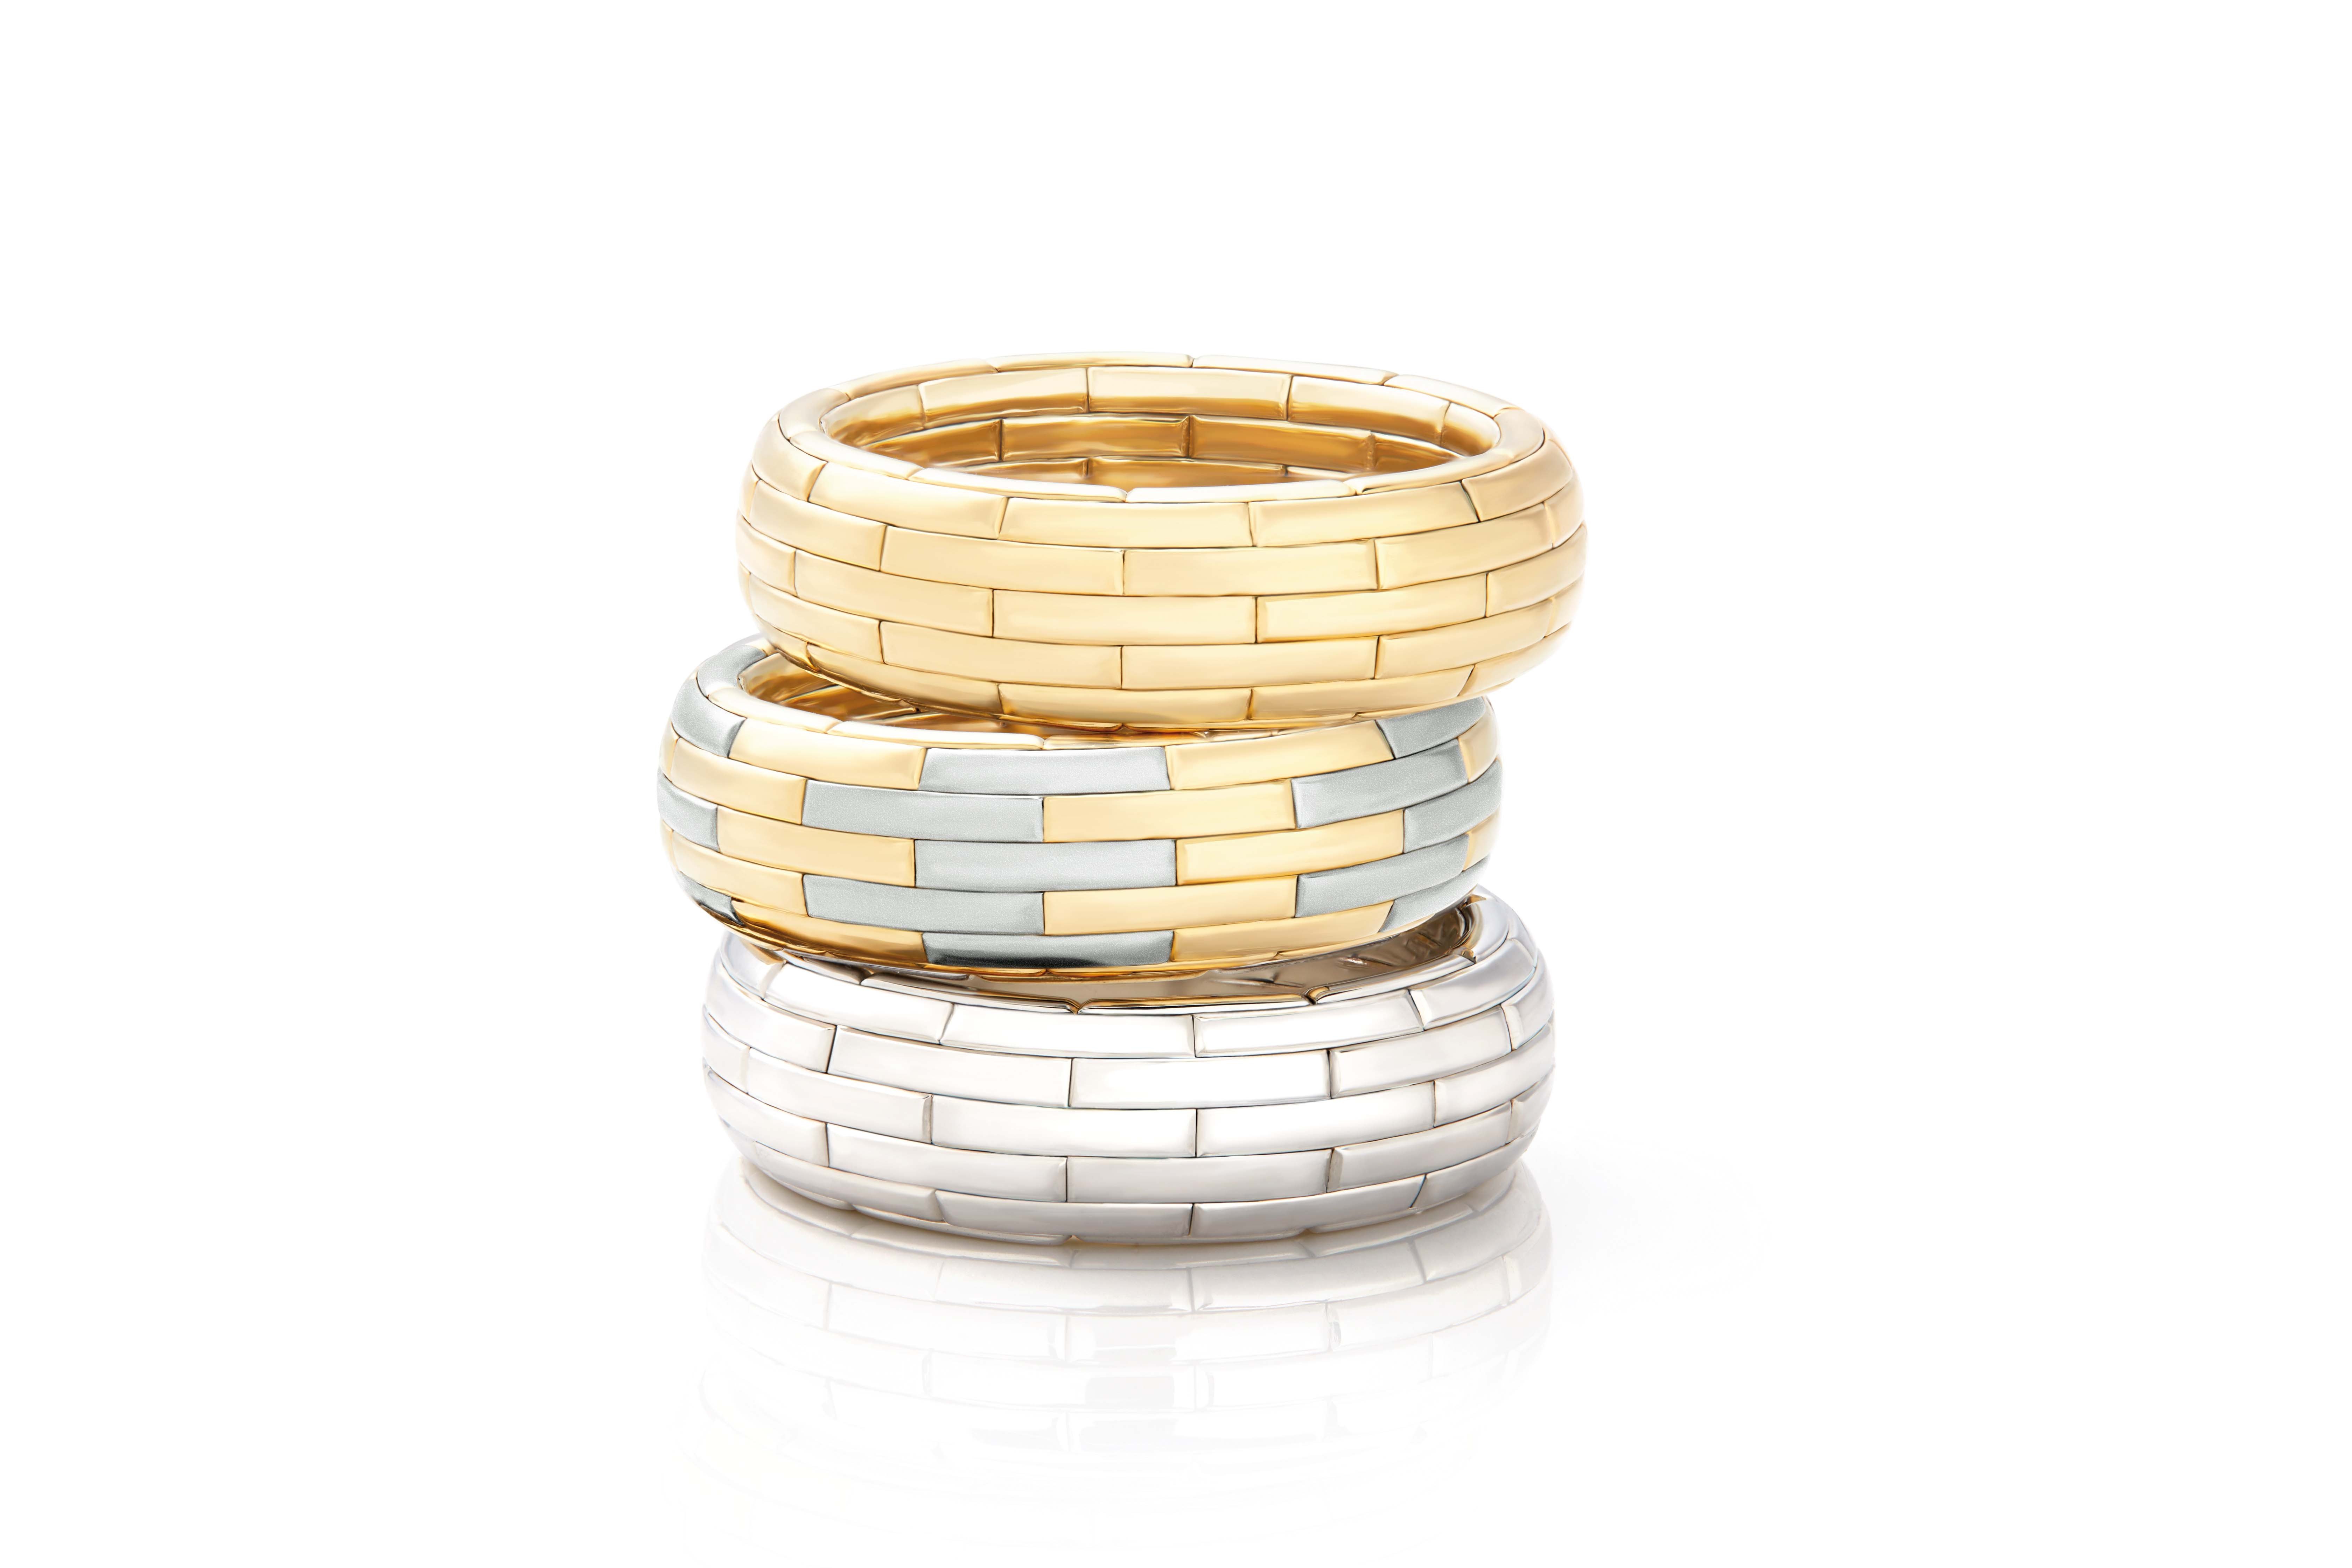 There are white gold, yellow gold, rose gold and pink gold bangles to choose from